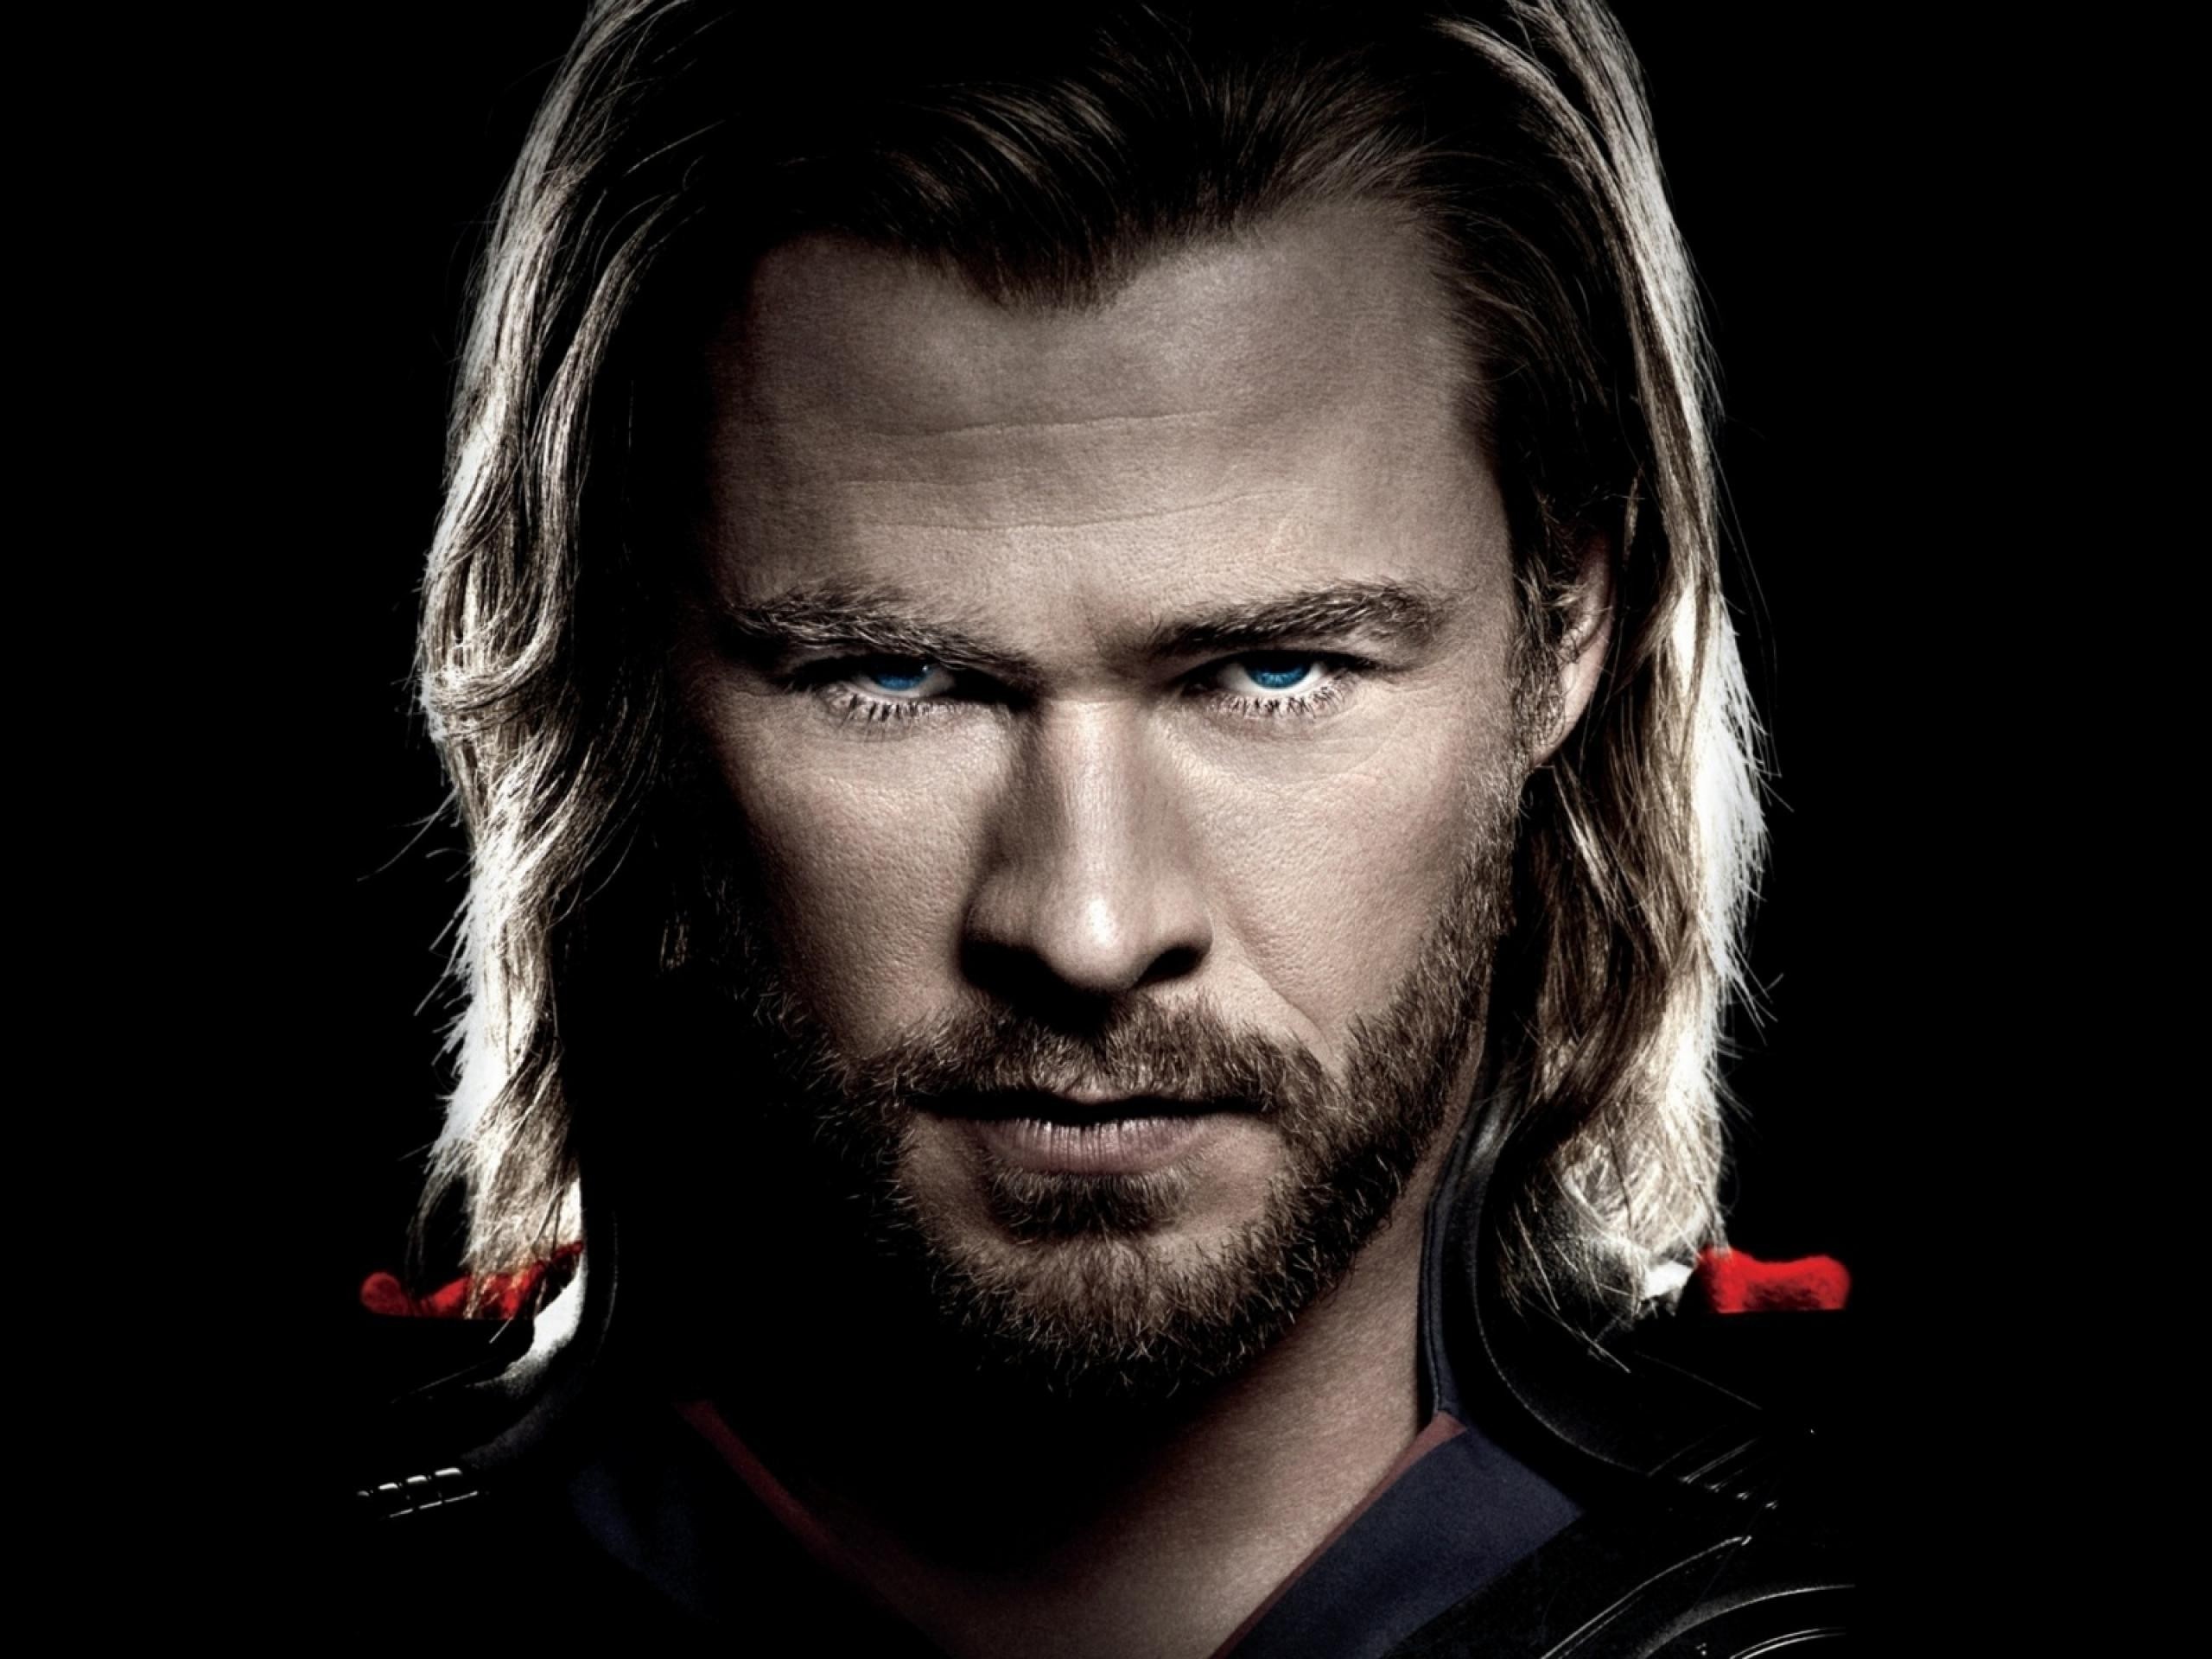 Chris Hemsworth: An Australian Actor best known for portraying the 'Marvel Comics' superhero. 2560x1920 HD Background.